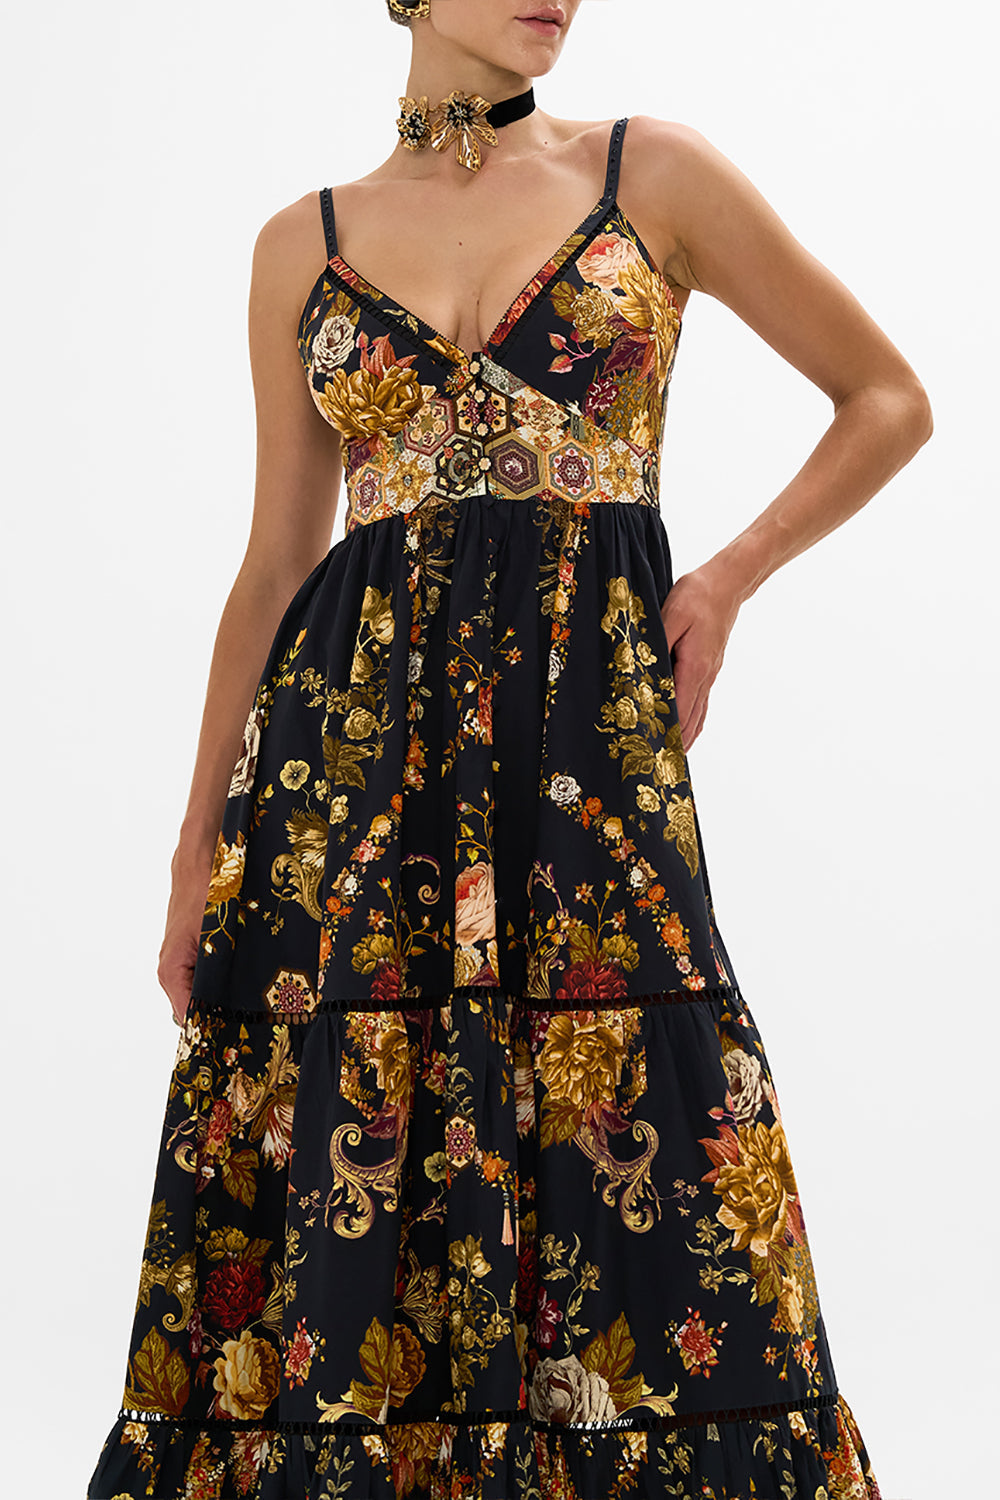 CAMILLA floral tiered bodice dress in Stitched in Time print.